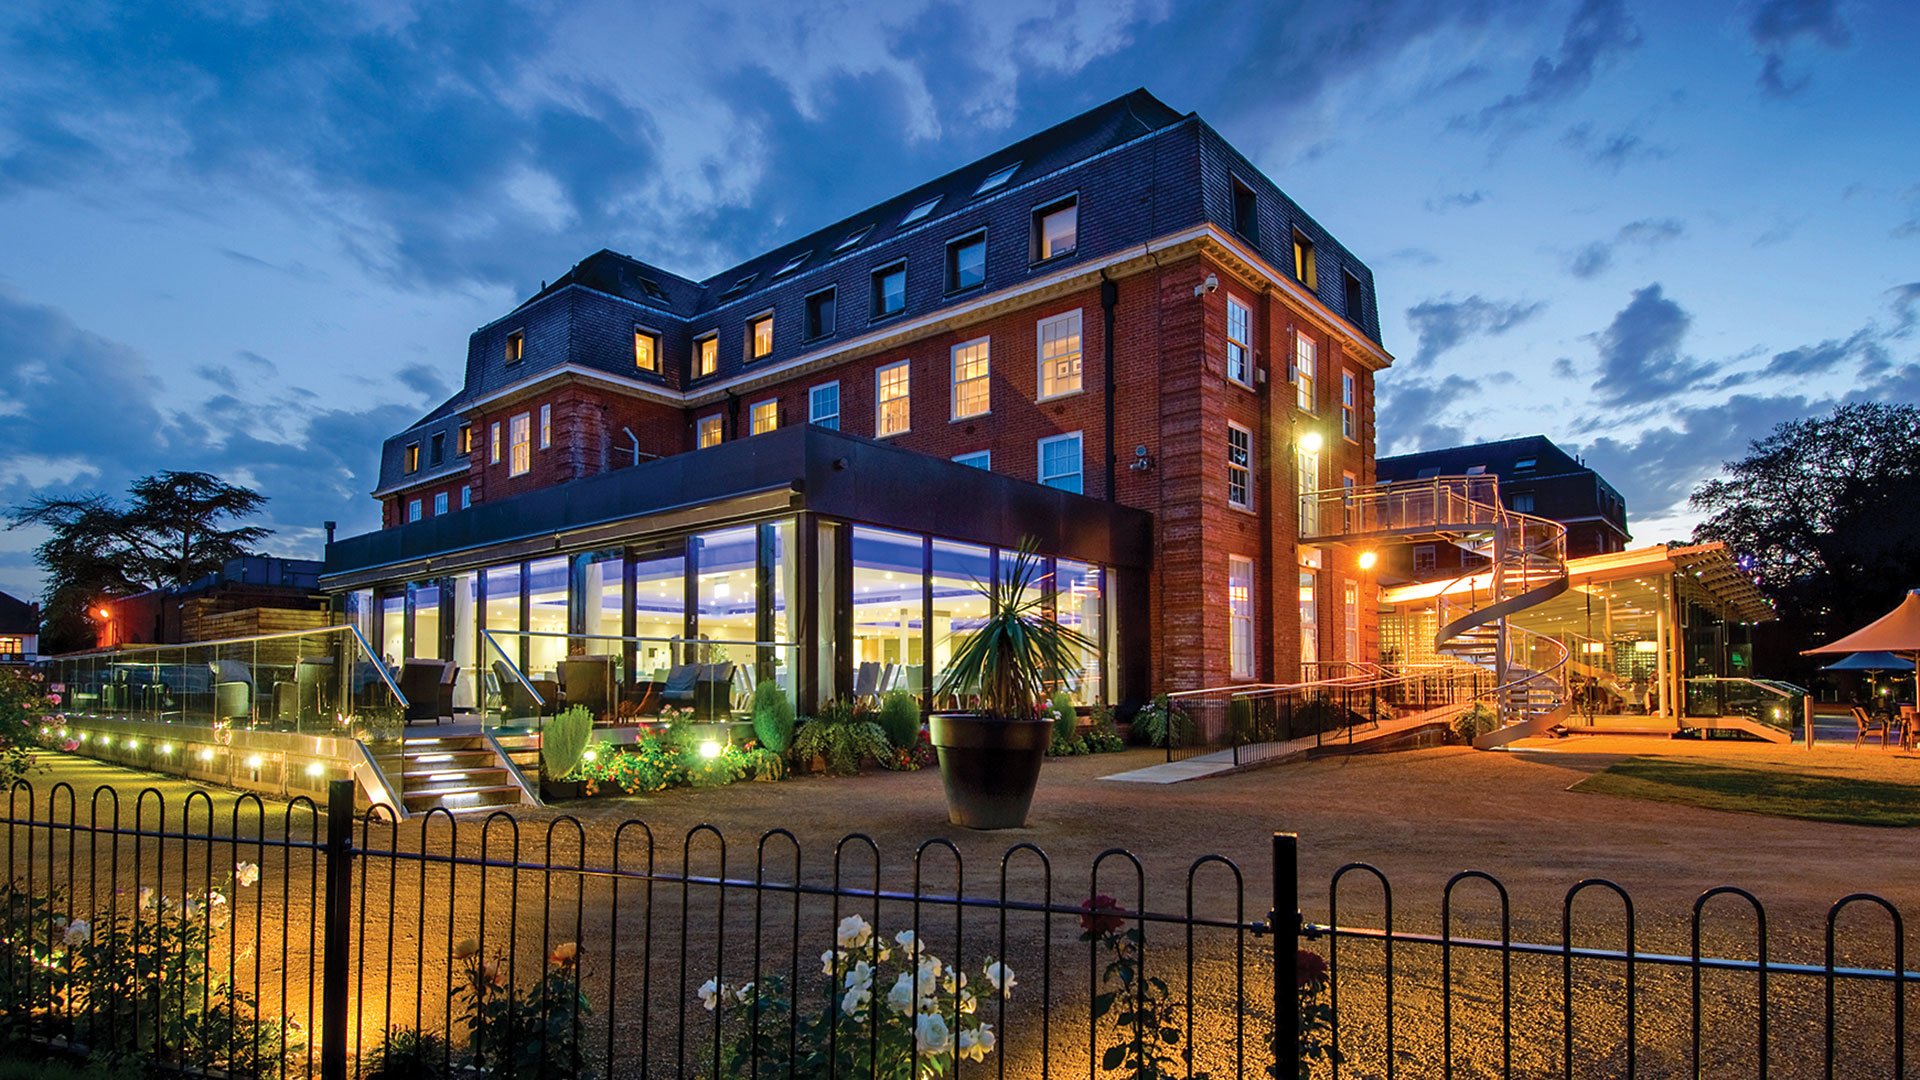 The exterior of the hotel, lit up in the evening - The Lensbury, Teddington